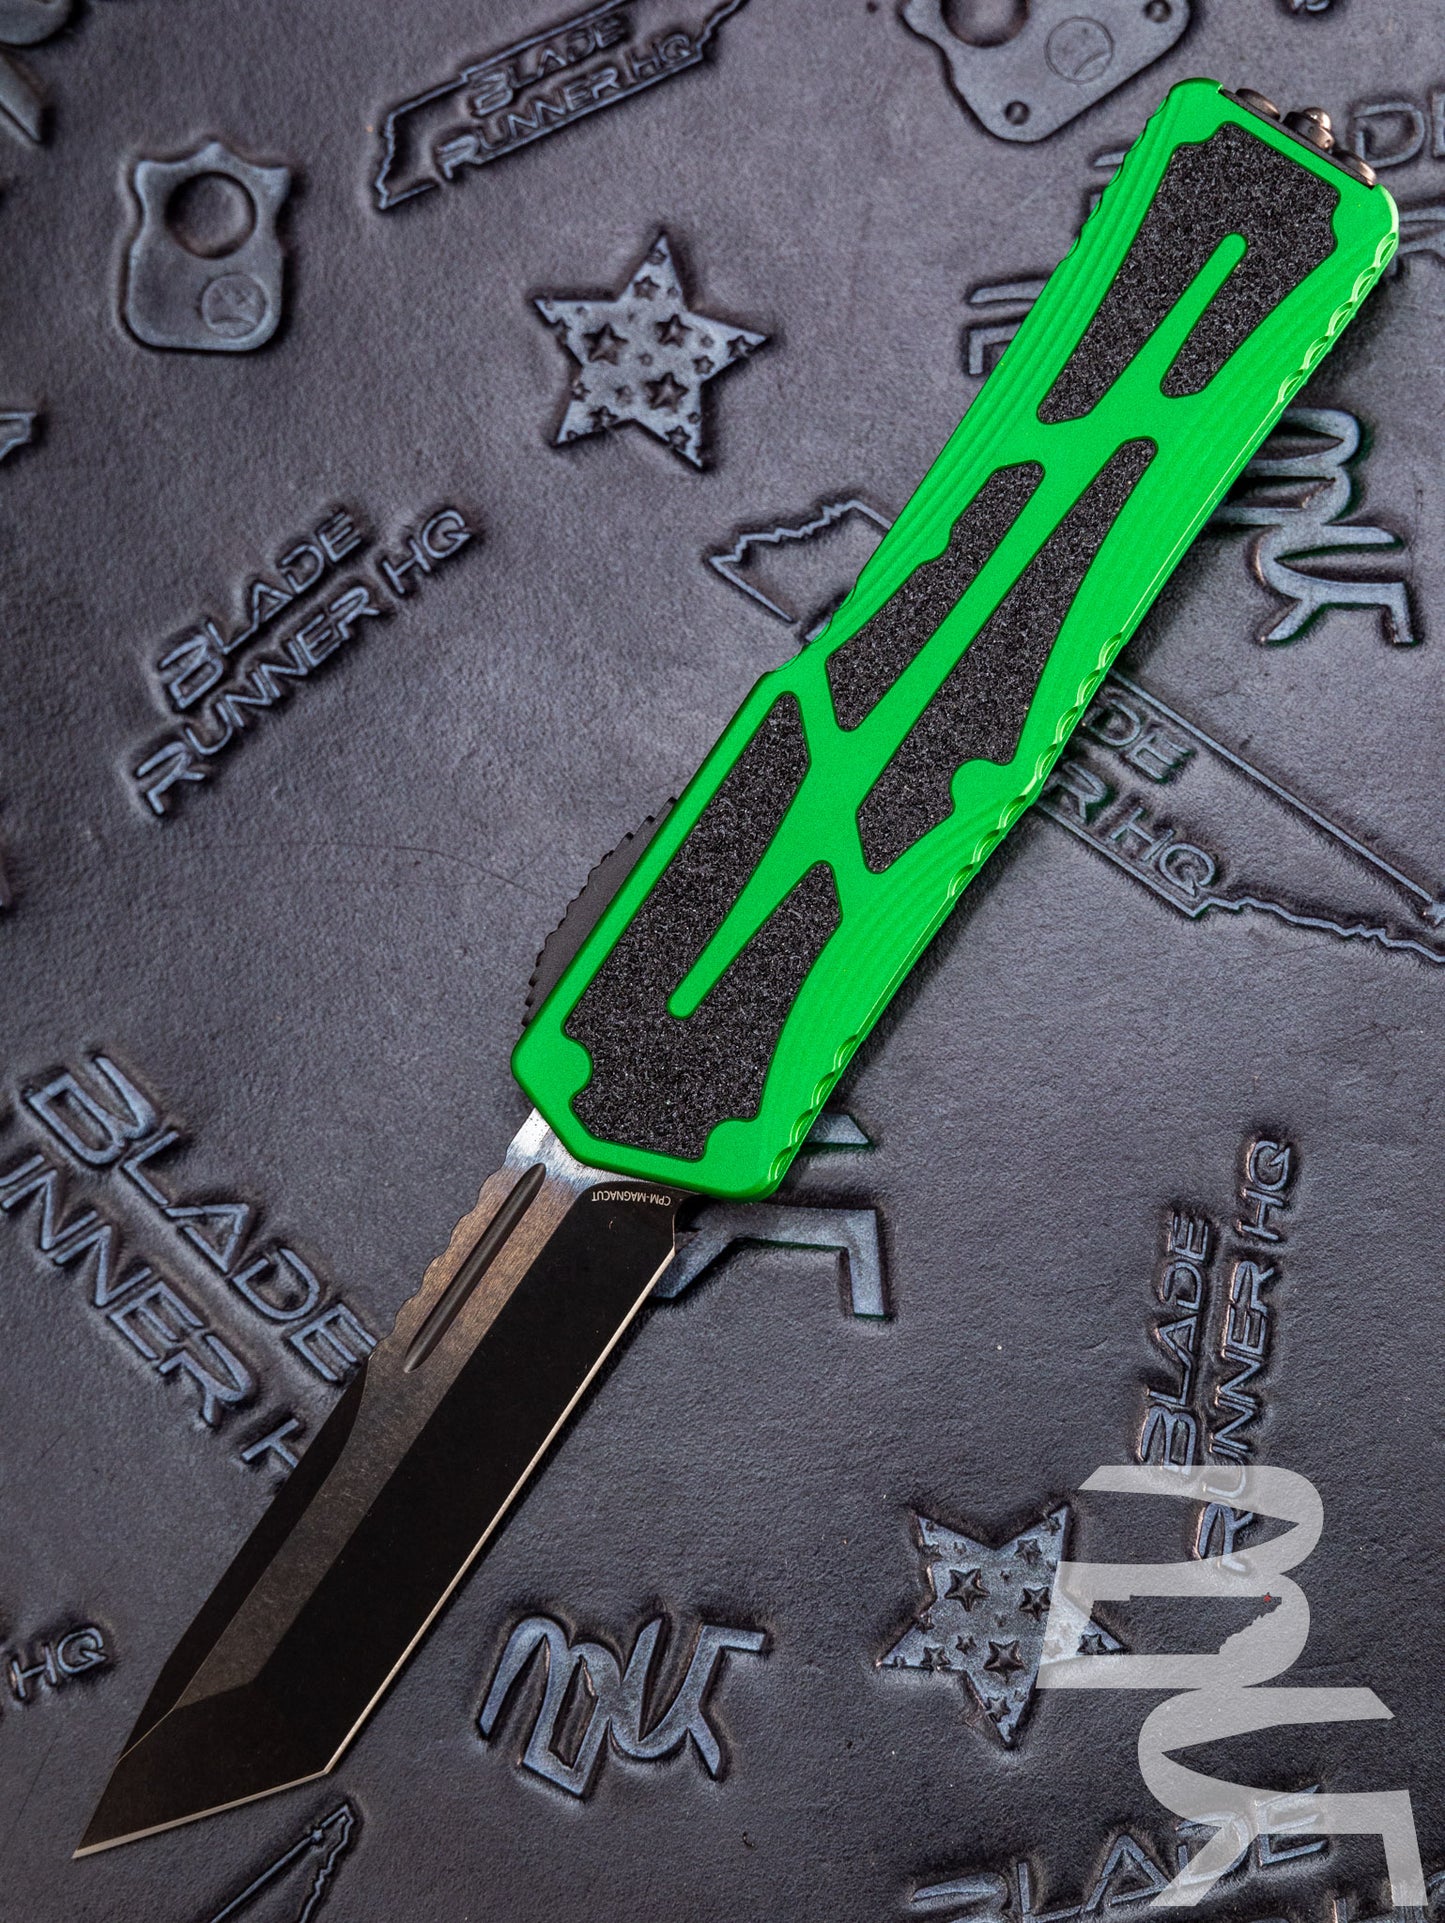 HERETIC KNIVES "COLOSSUS" TOXIC GREEN OTF AUTOMATIC KNIFE GREEN 3.5" TANTO DLC H040-6A-TXGRN